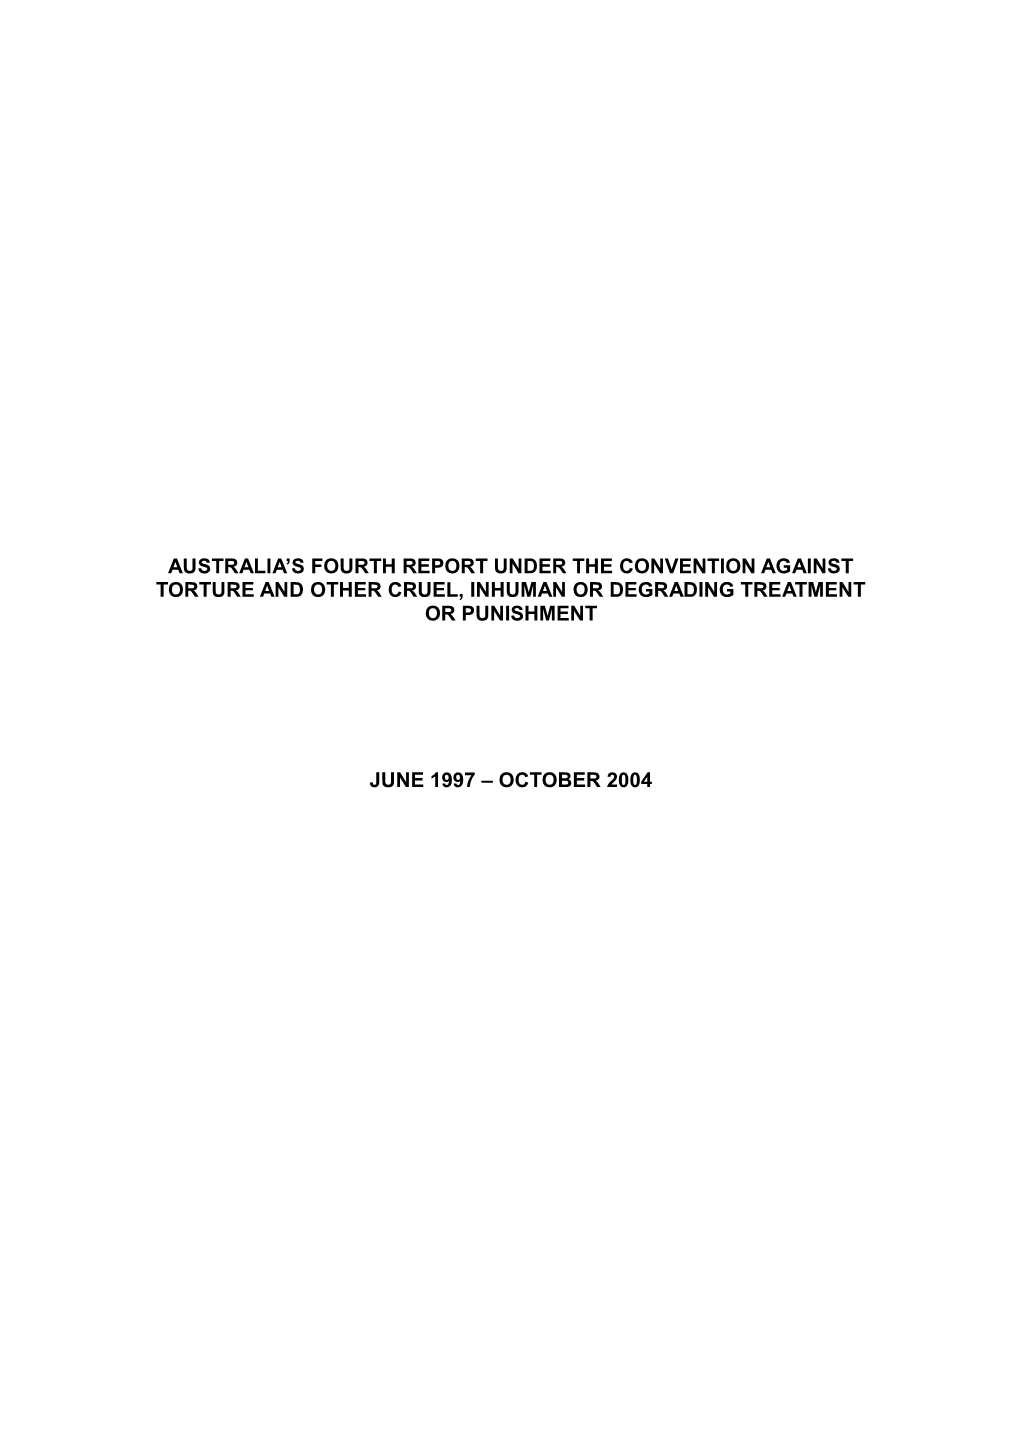 Australia S Fourth Report Under the Convention Against Torture and Other Cruel, Inhuman